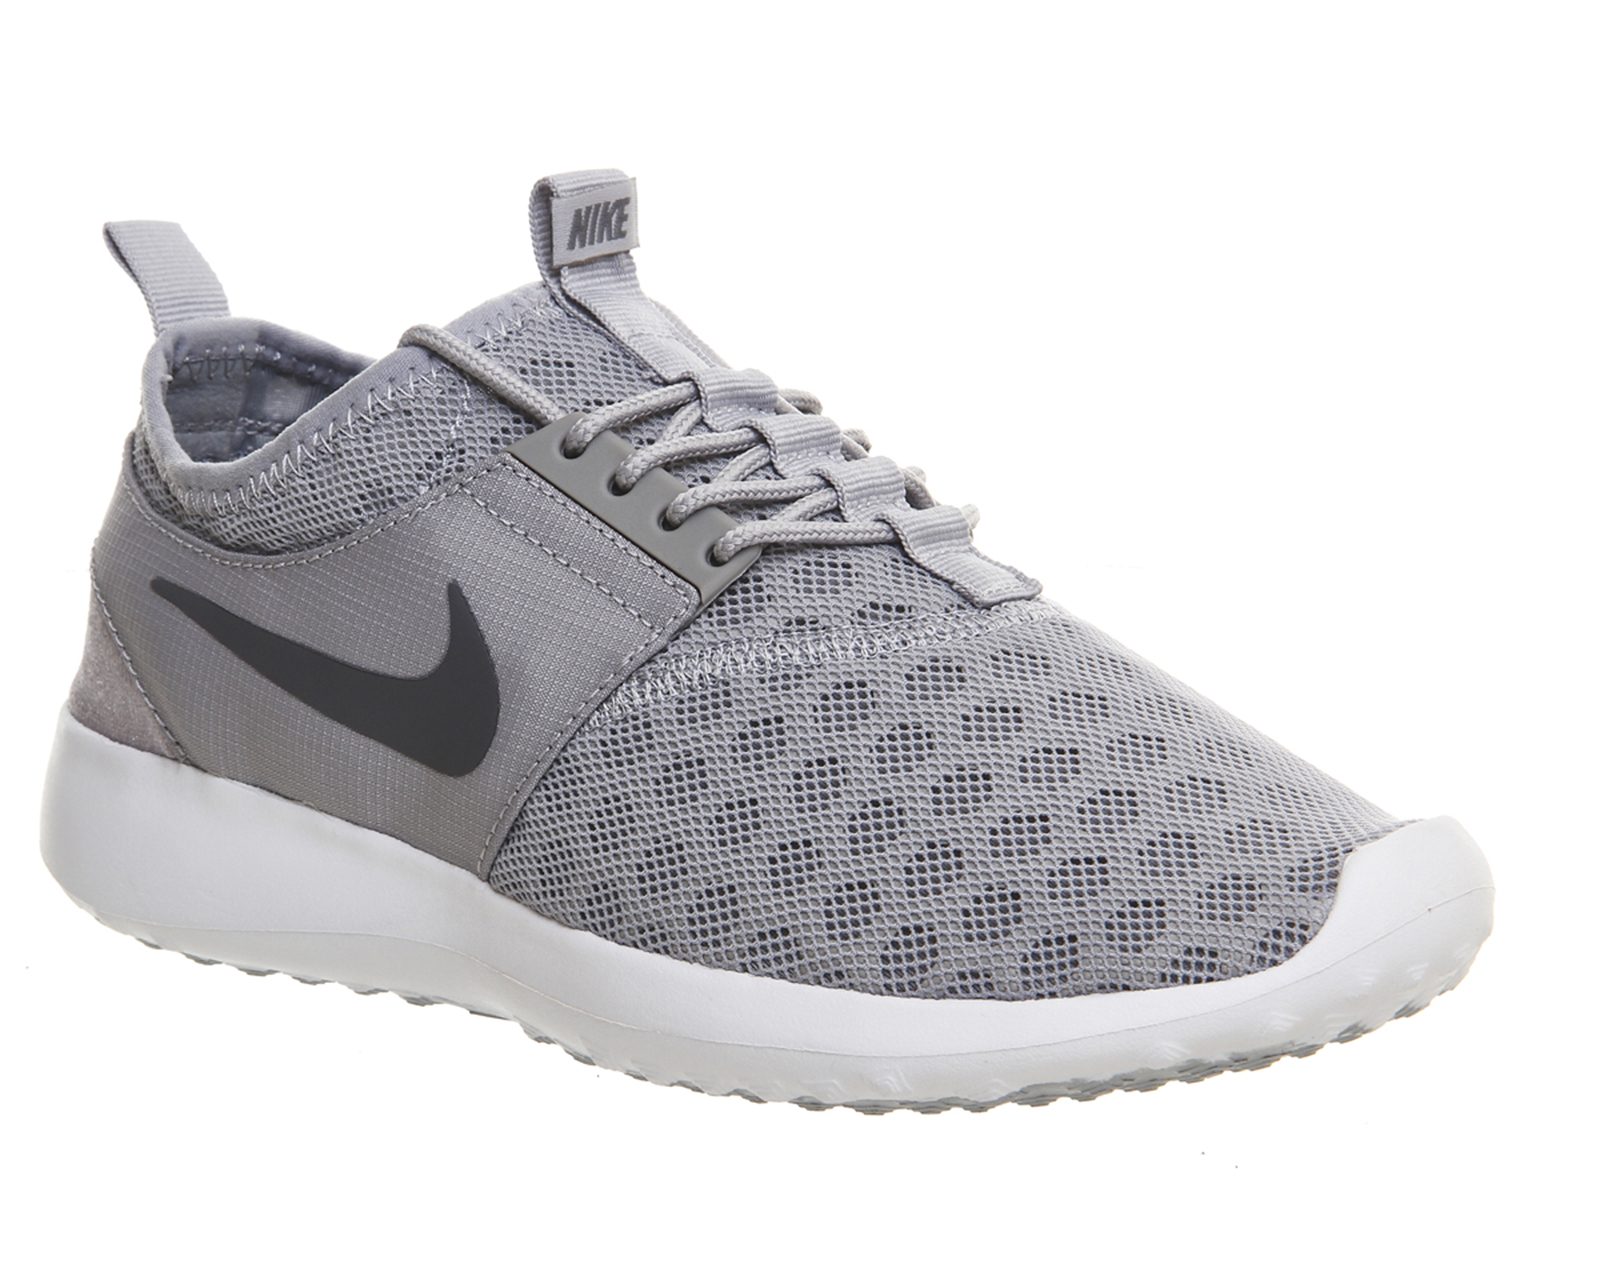 Nike Juvenate Wolf Grey - Hers trainers